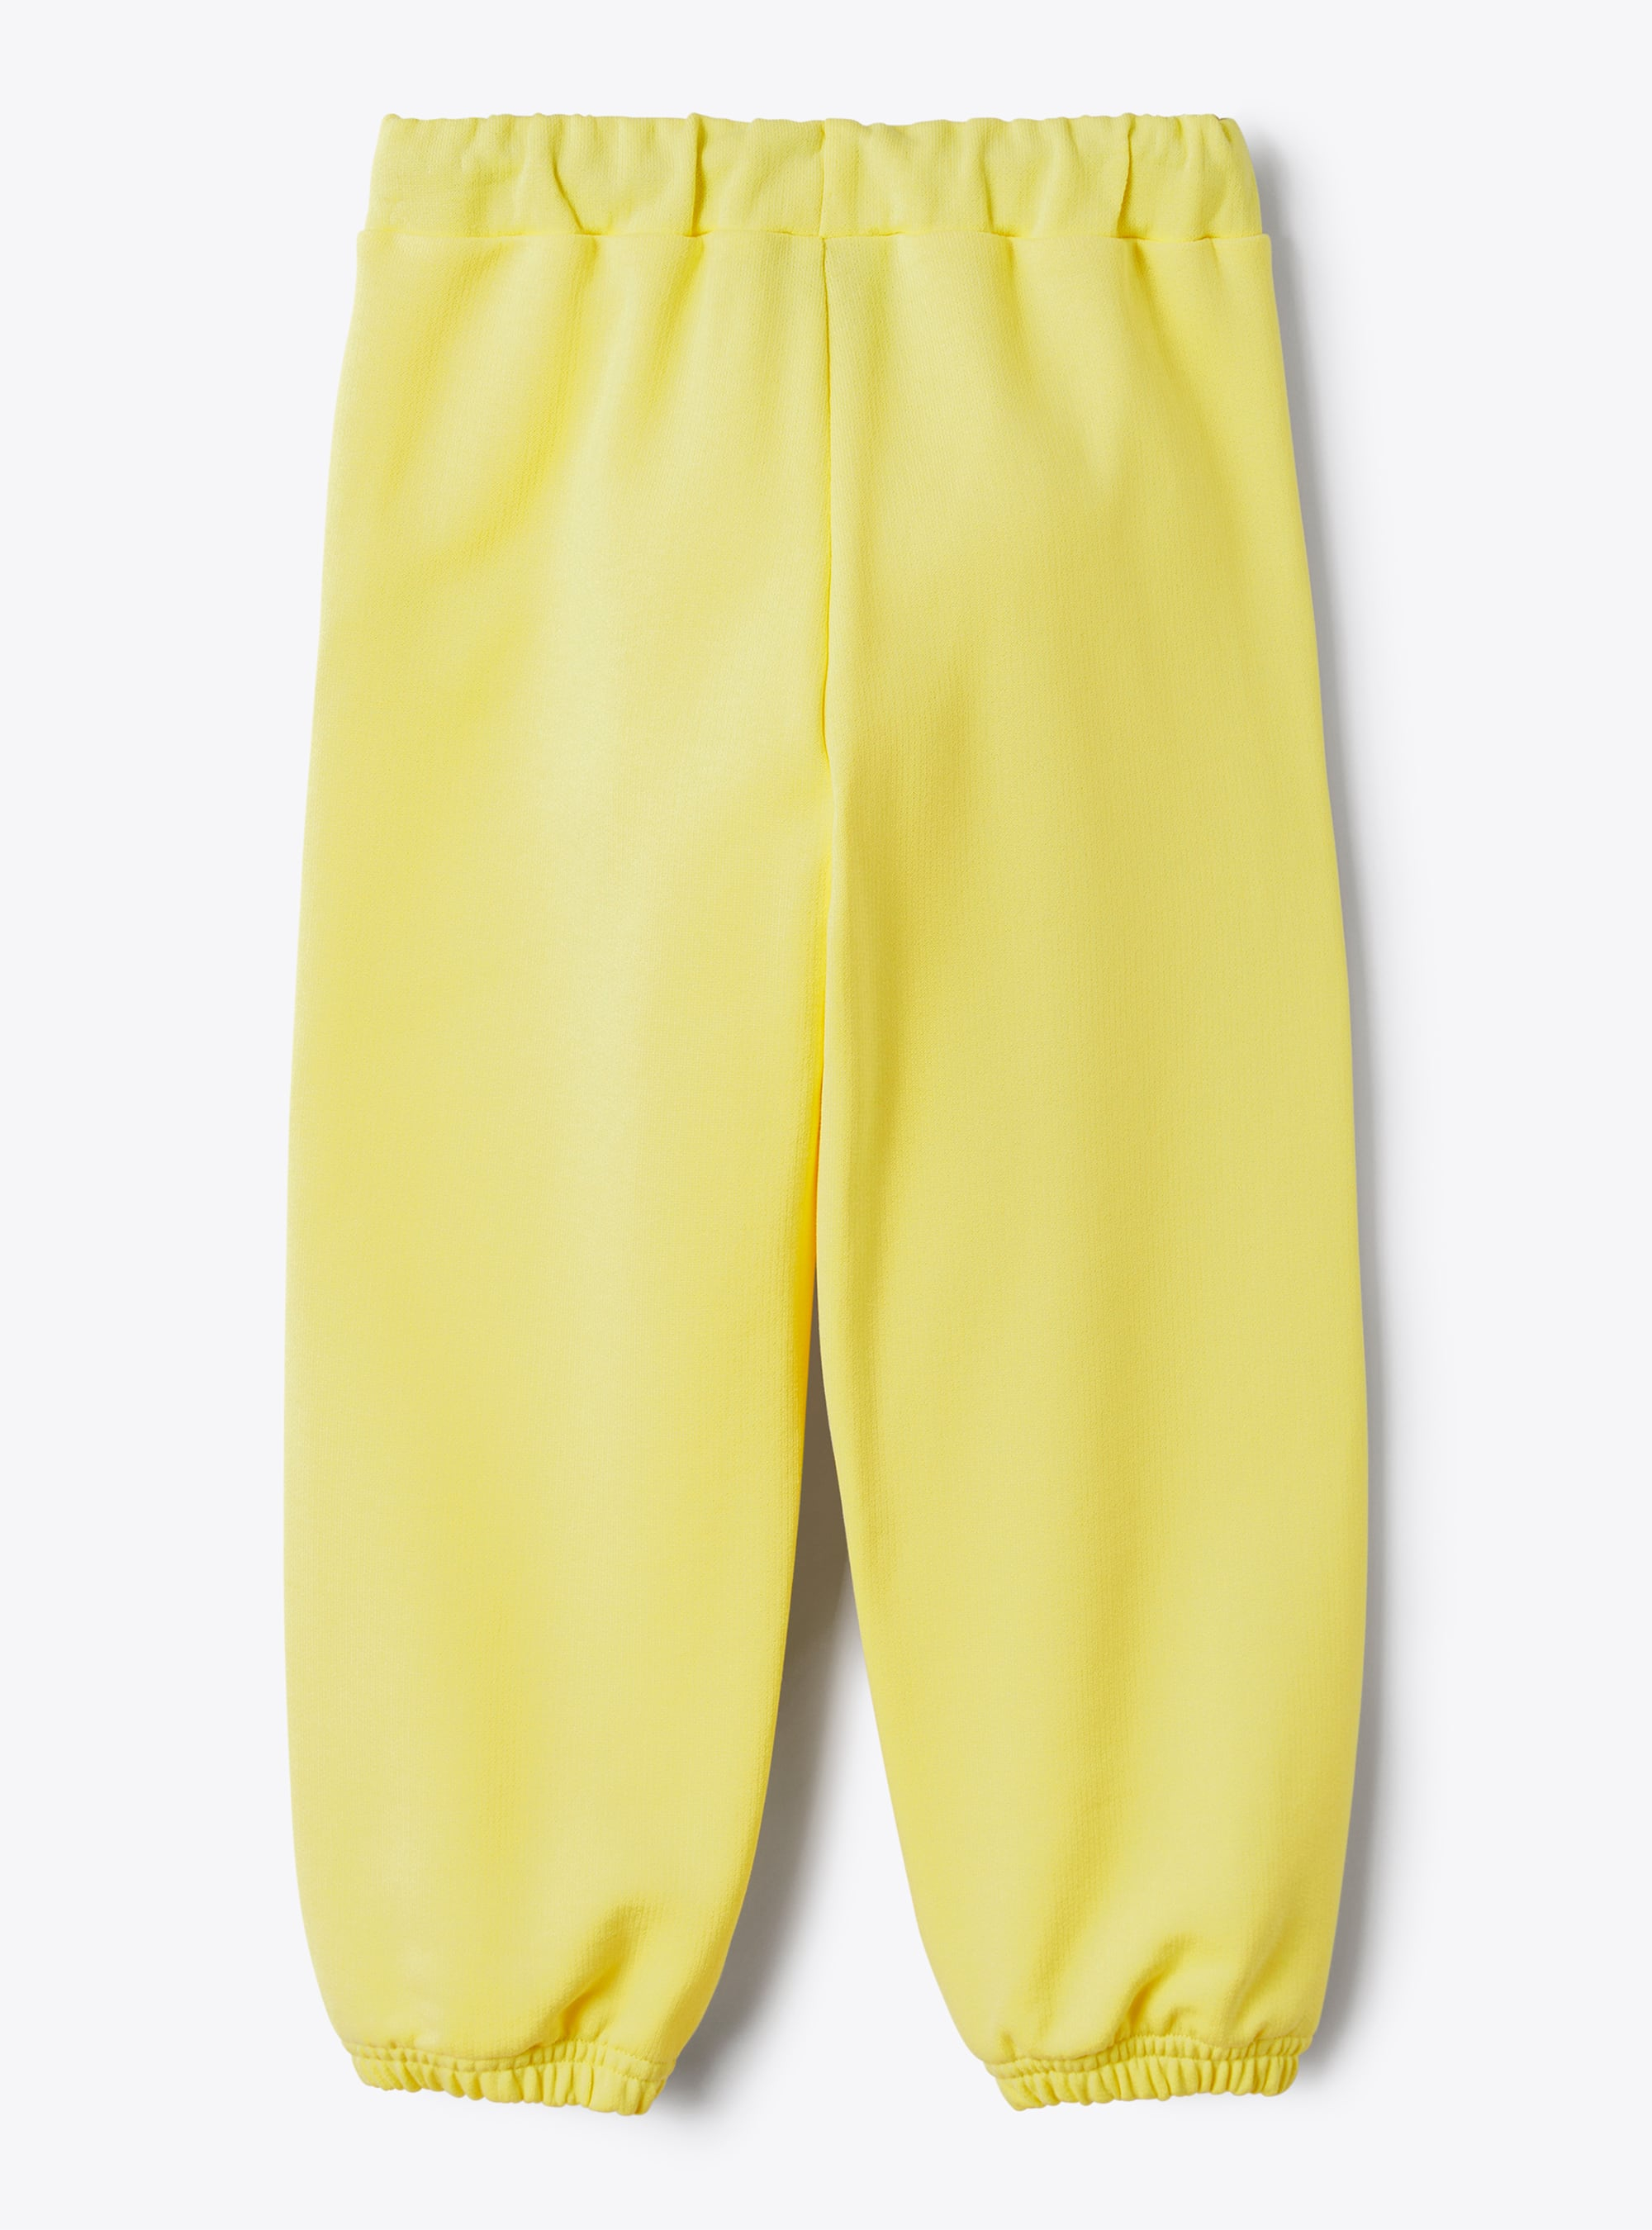 Jogging pants in yellow cotton fleece with a drawstring - Yellow | Il Gufo